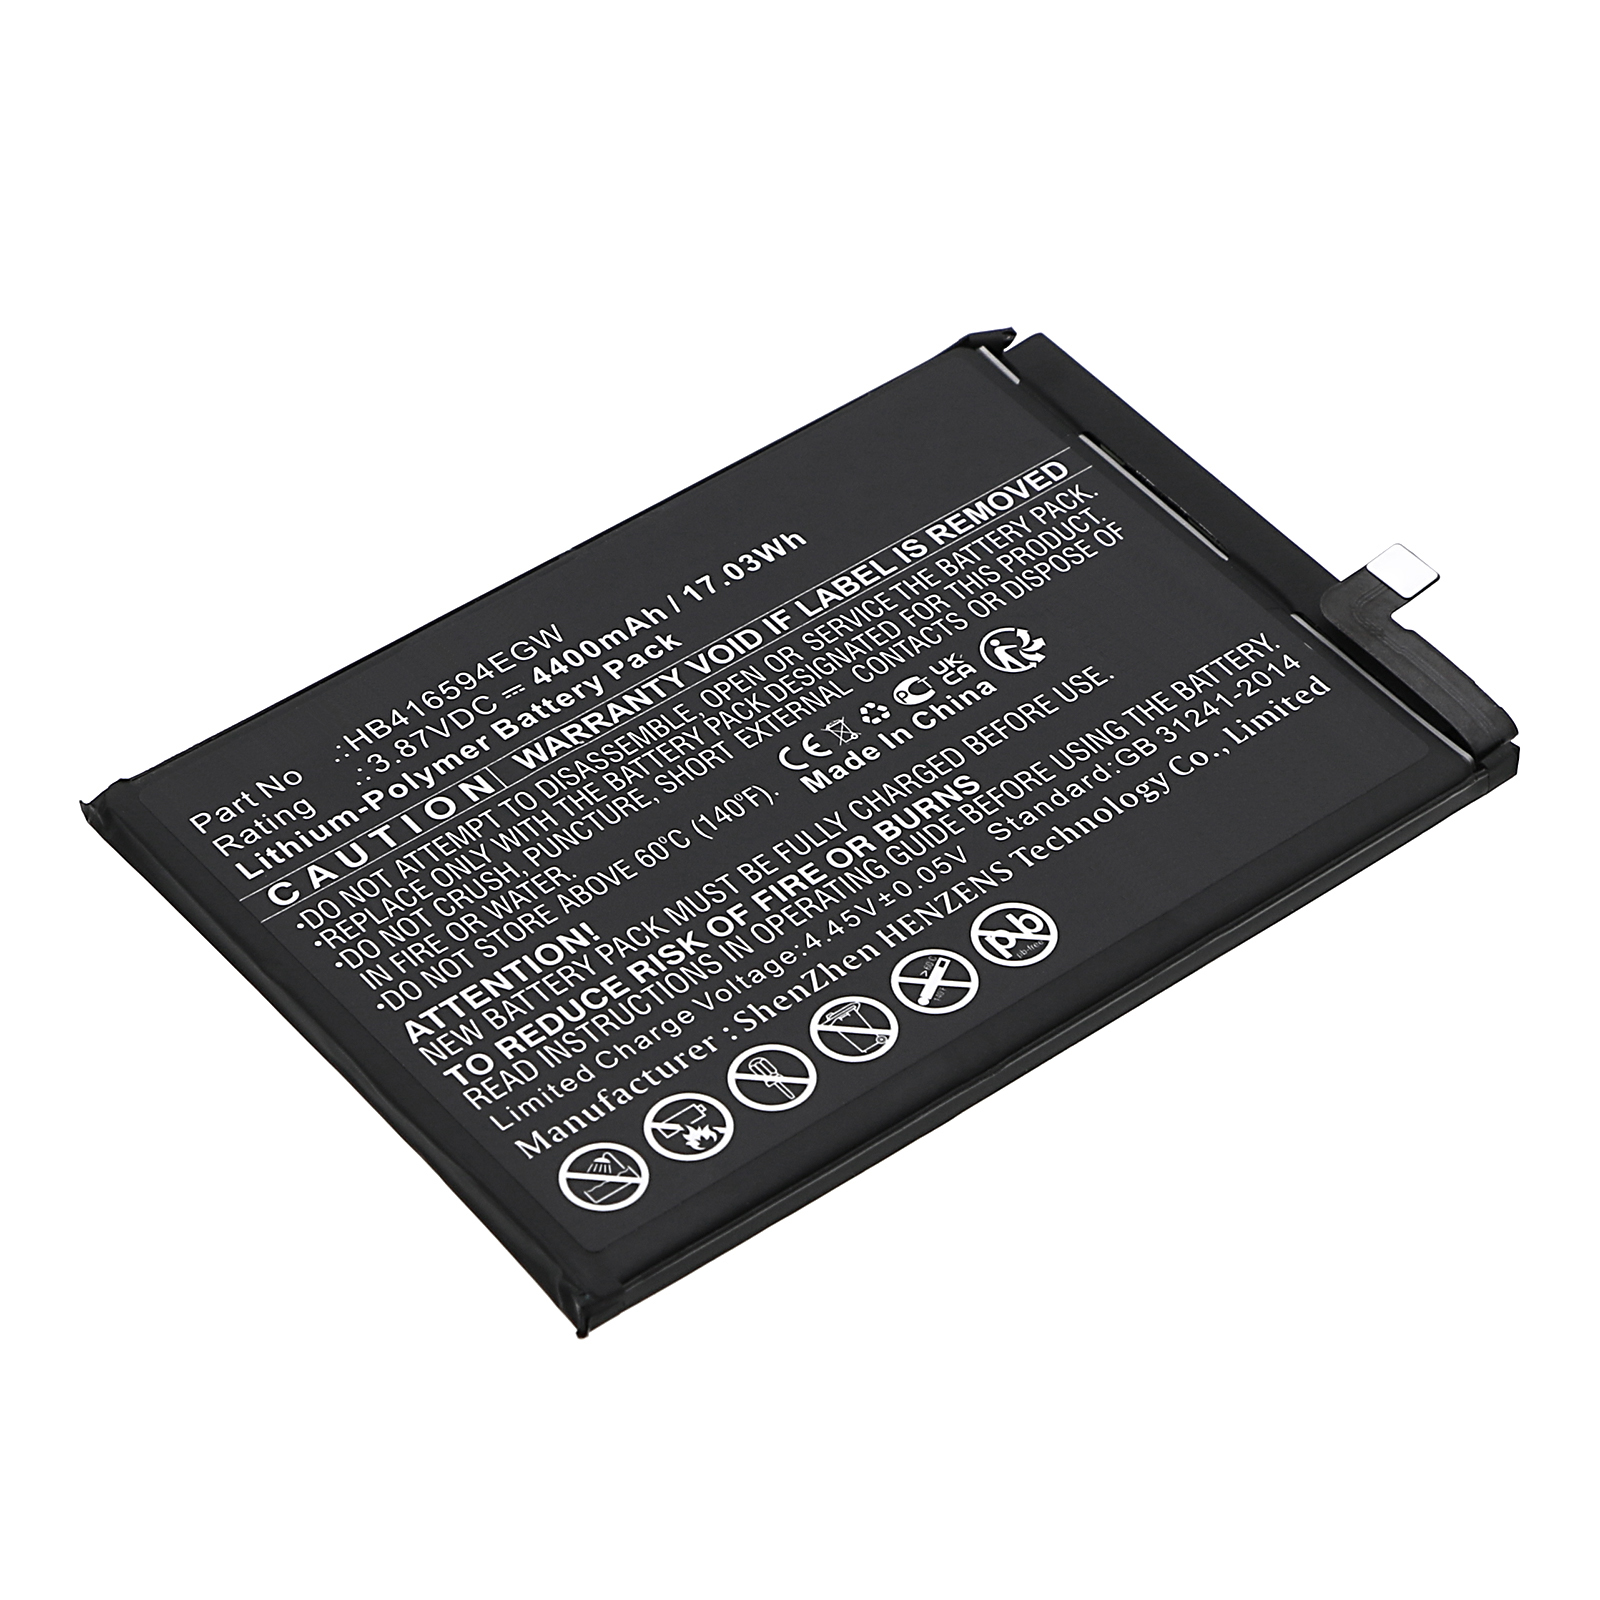 Synergy Digital Cell Phone Battery, Compatible with Honor HB416594EGW Cell Phone Battery (Li-Pol, 3.87V, 4400mAh)